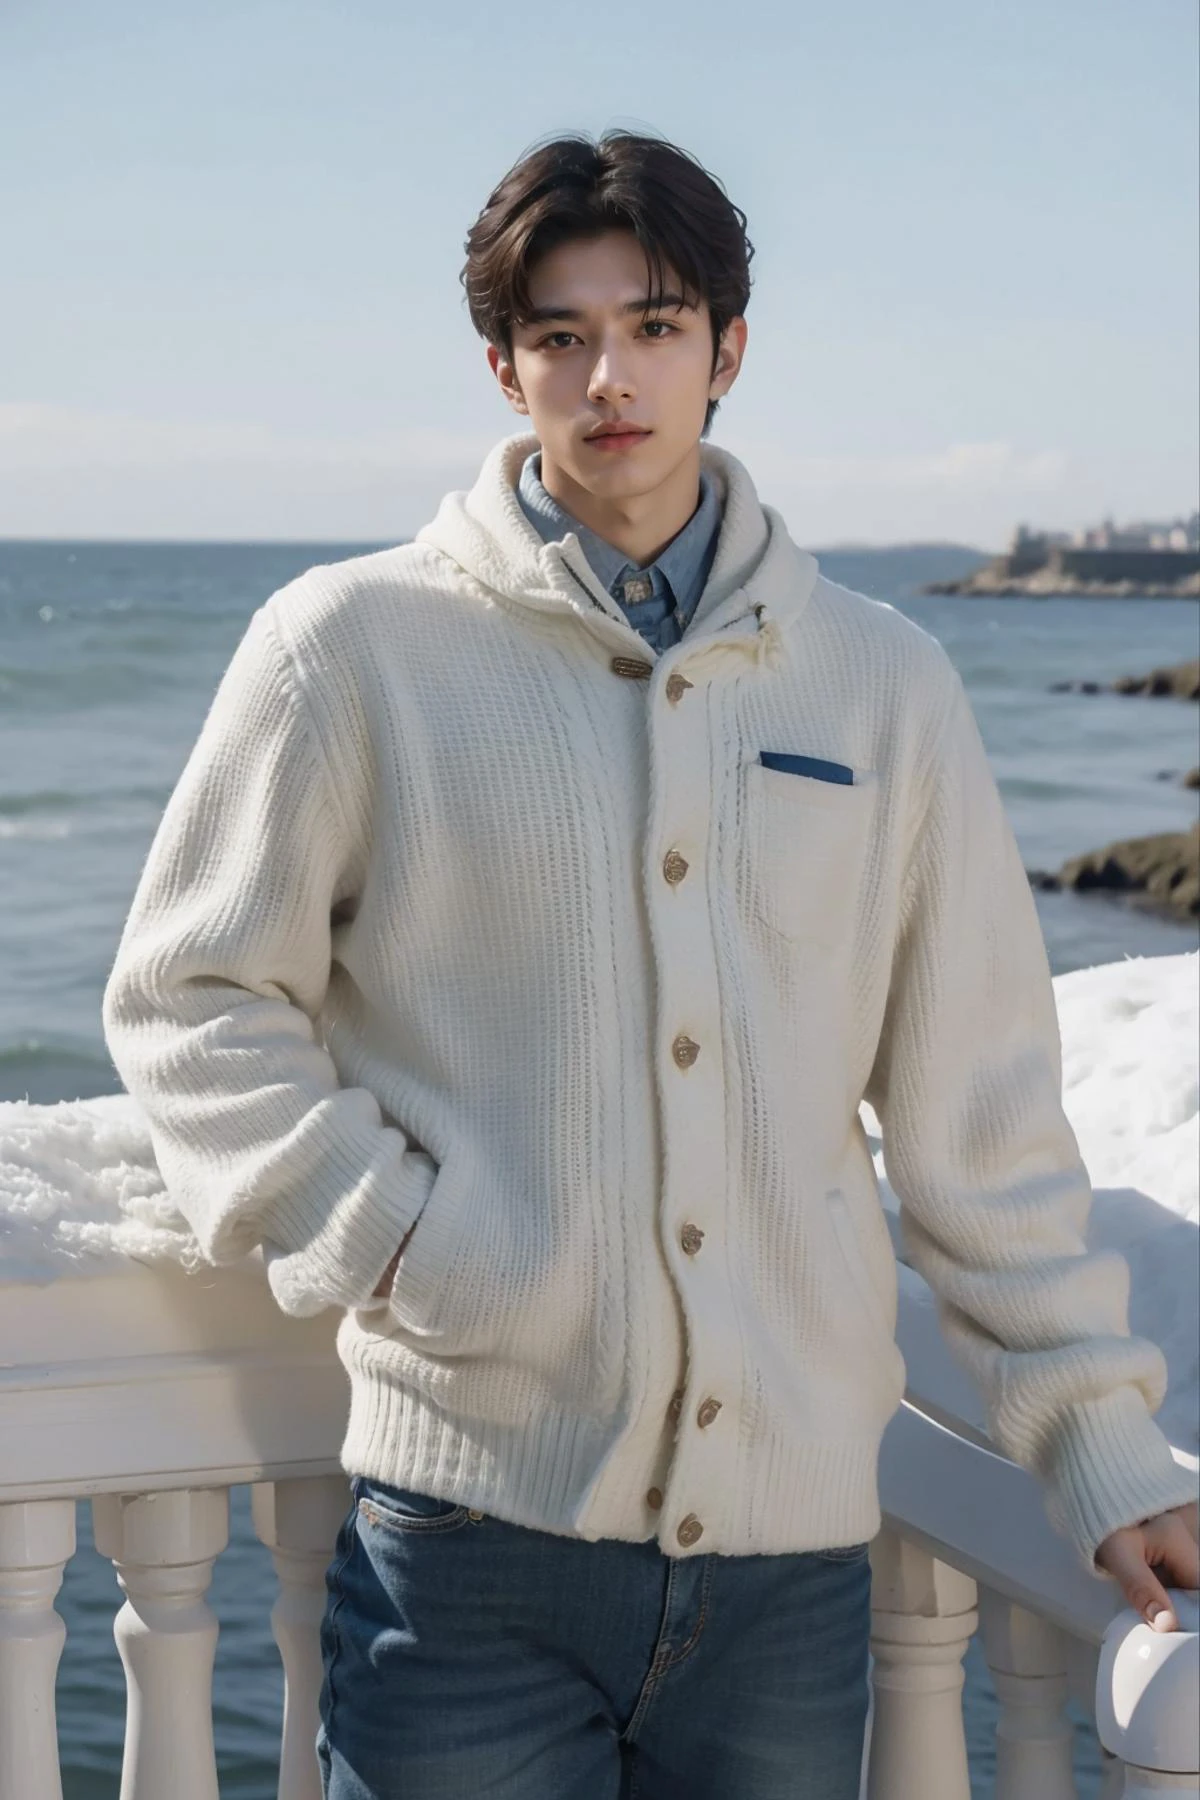 handsome male,big muscle,crew cut,soft light dark academia,outfits,winter,seaside